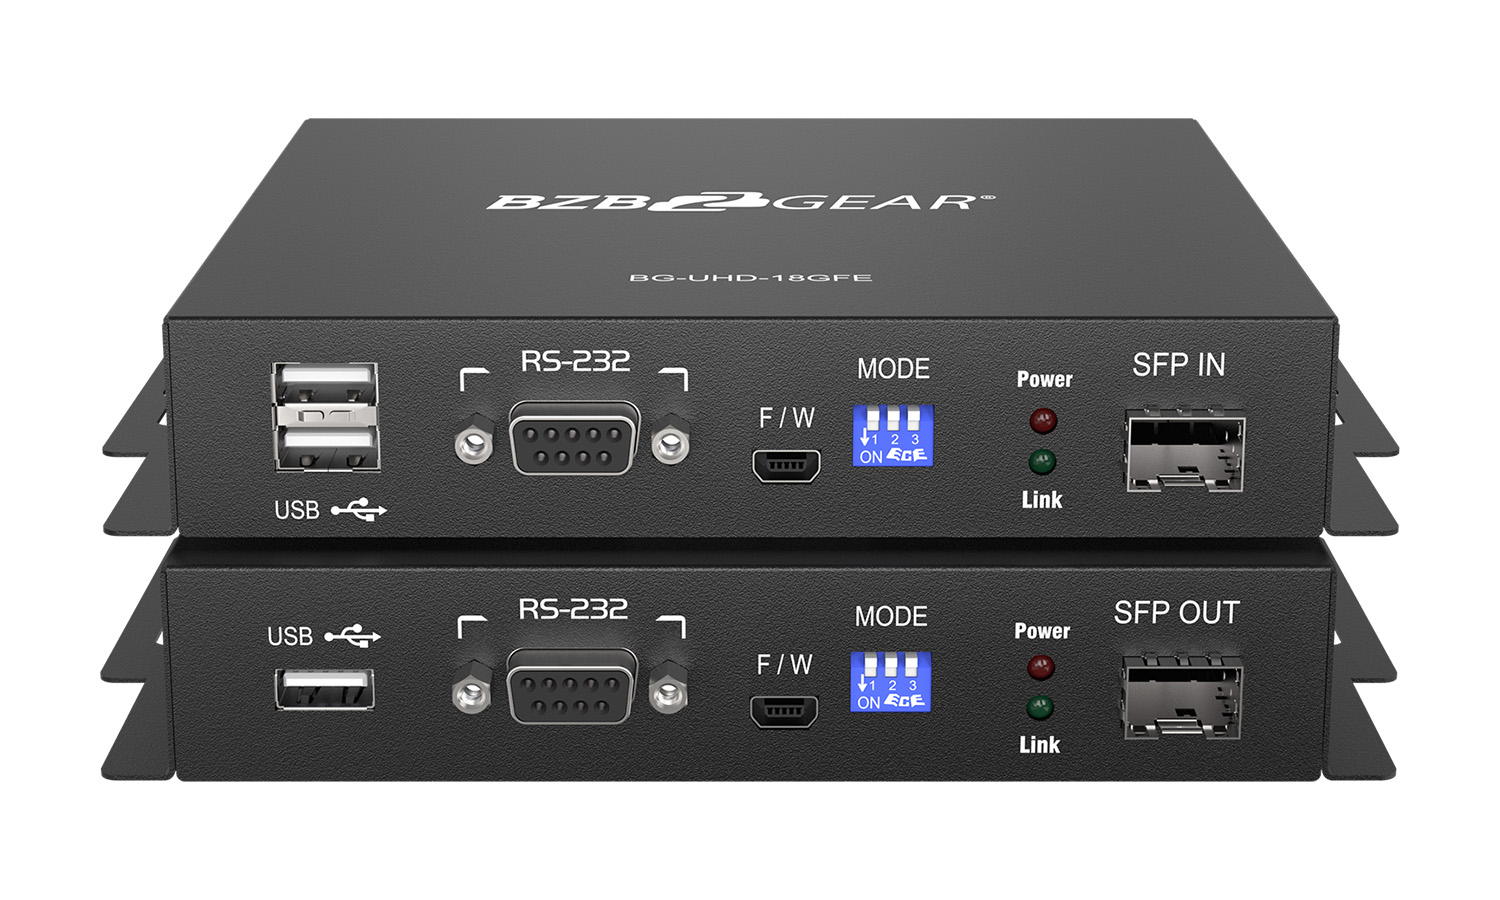 BG-UHD-18GFE-C 4K HDMI USB KVM Extender Kit over Fiber with HDR/2-Way IR/RS-232 and TAA Compliant (with SFP) by BZBGEAR